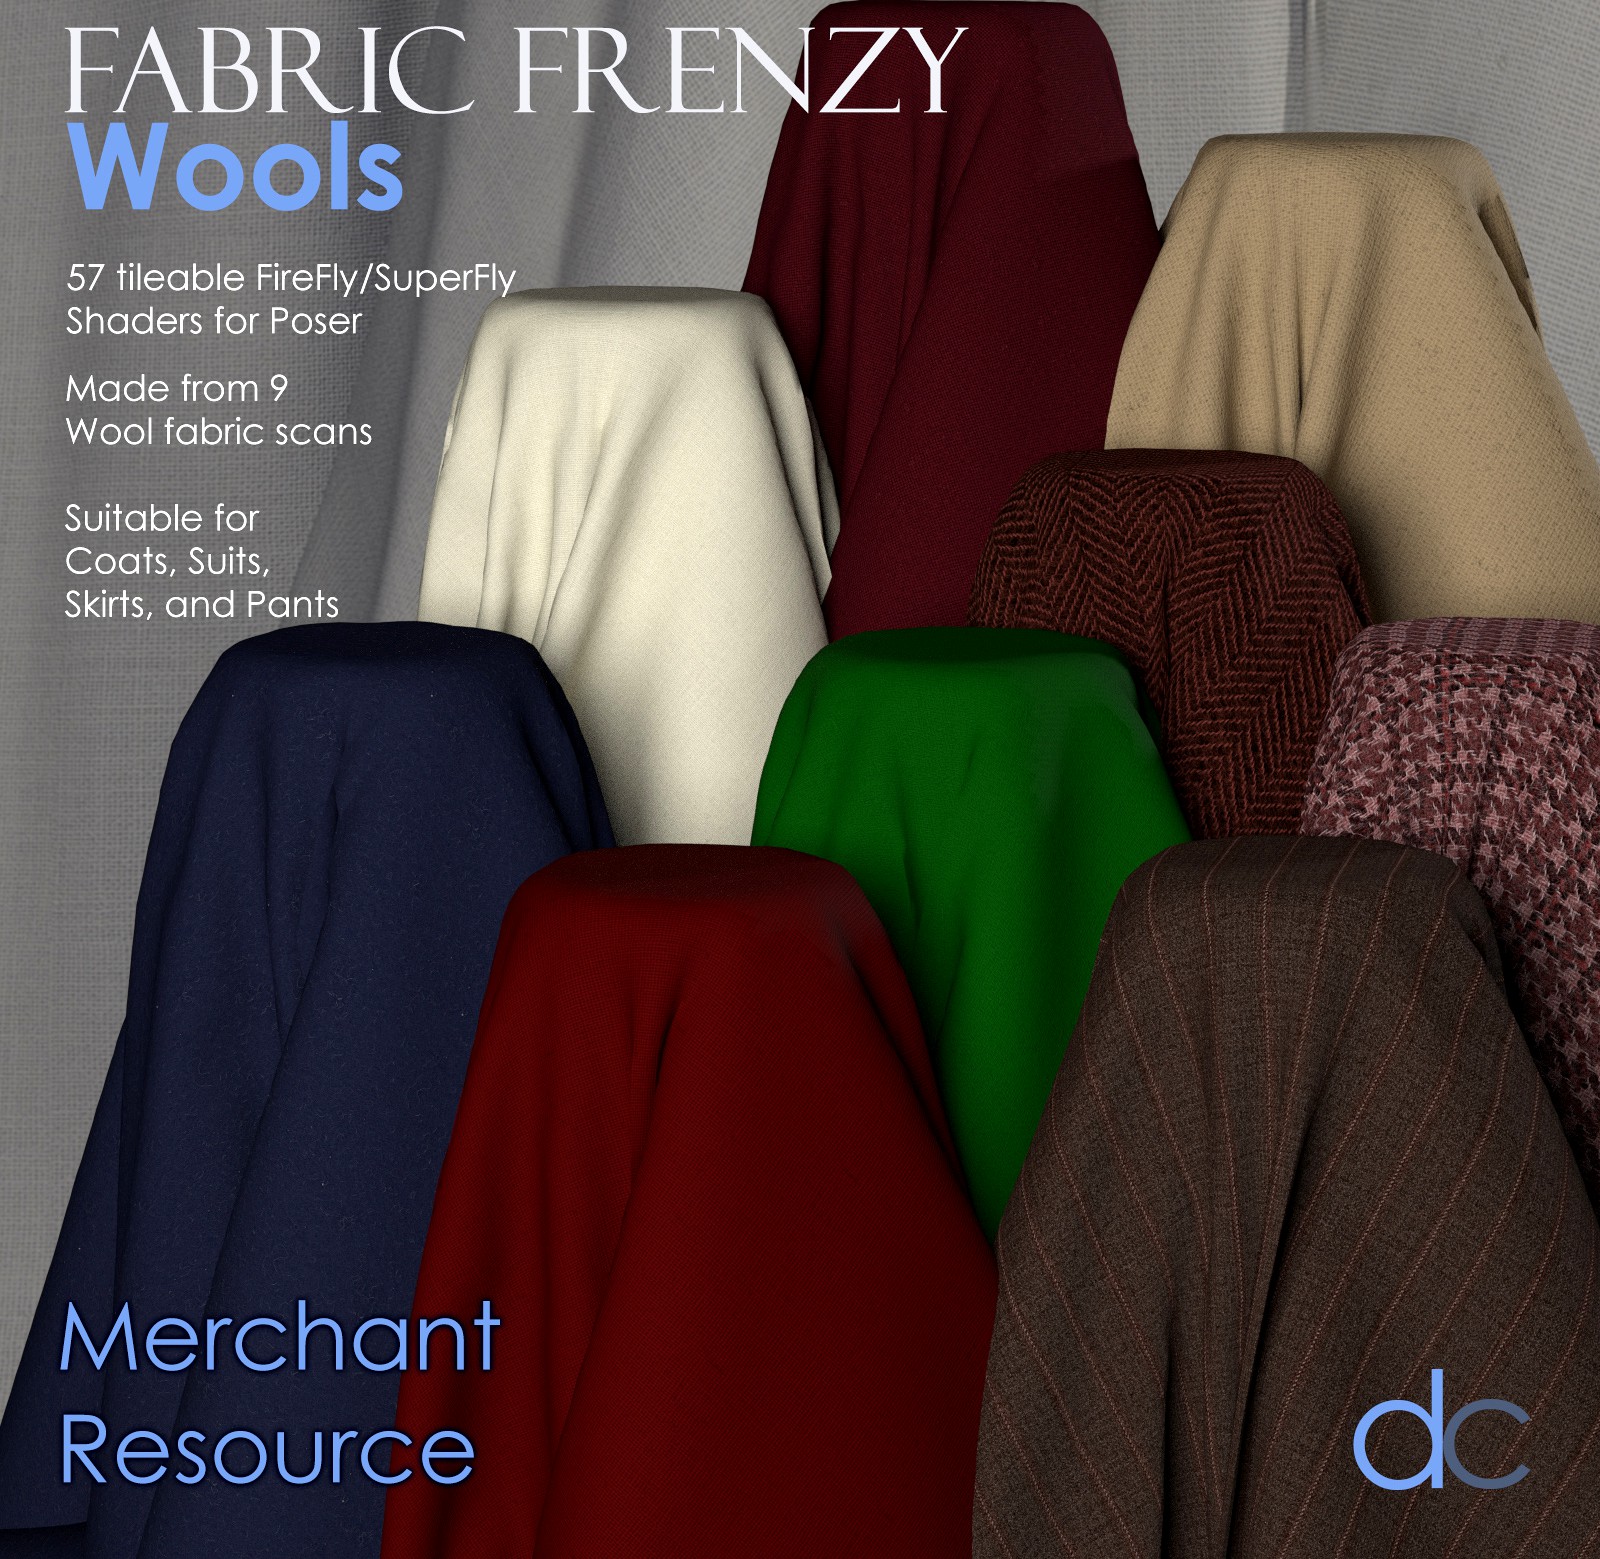 Fabric Frenzy: Wools PBR Textures and Poser Shaders